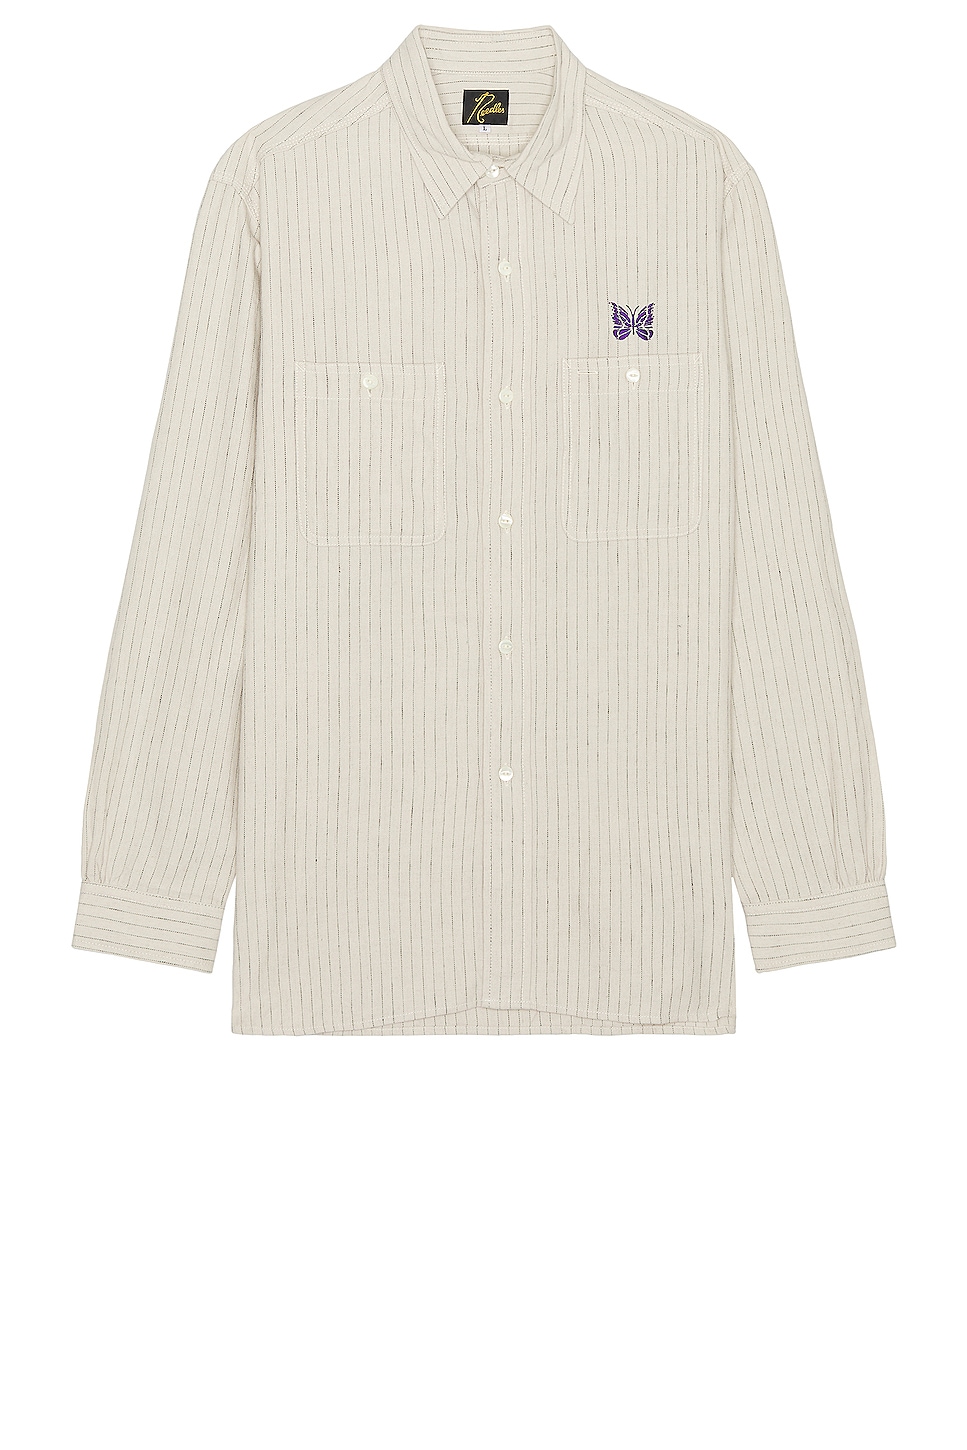 Image 1 of Needles Work Shirt in Off White